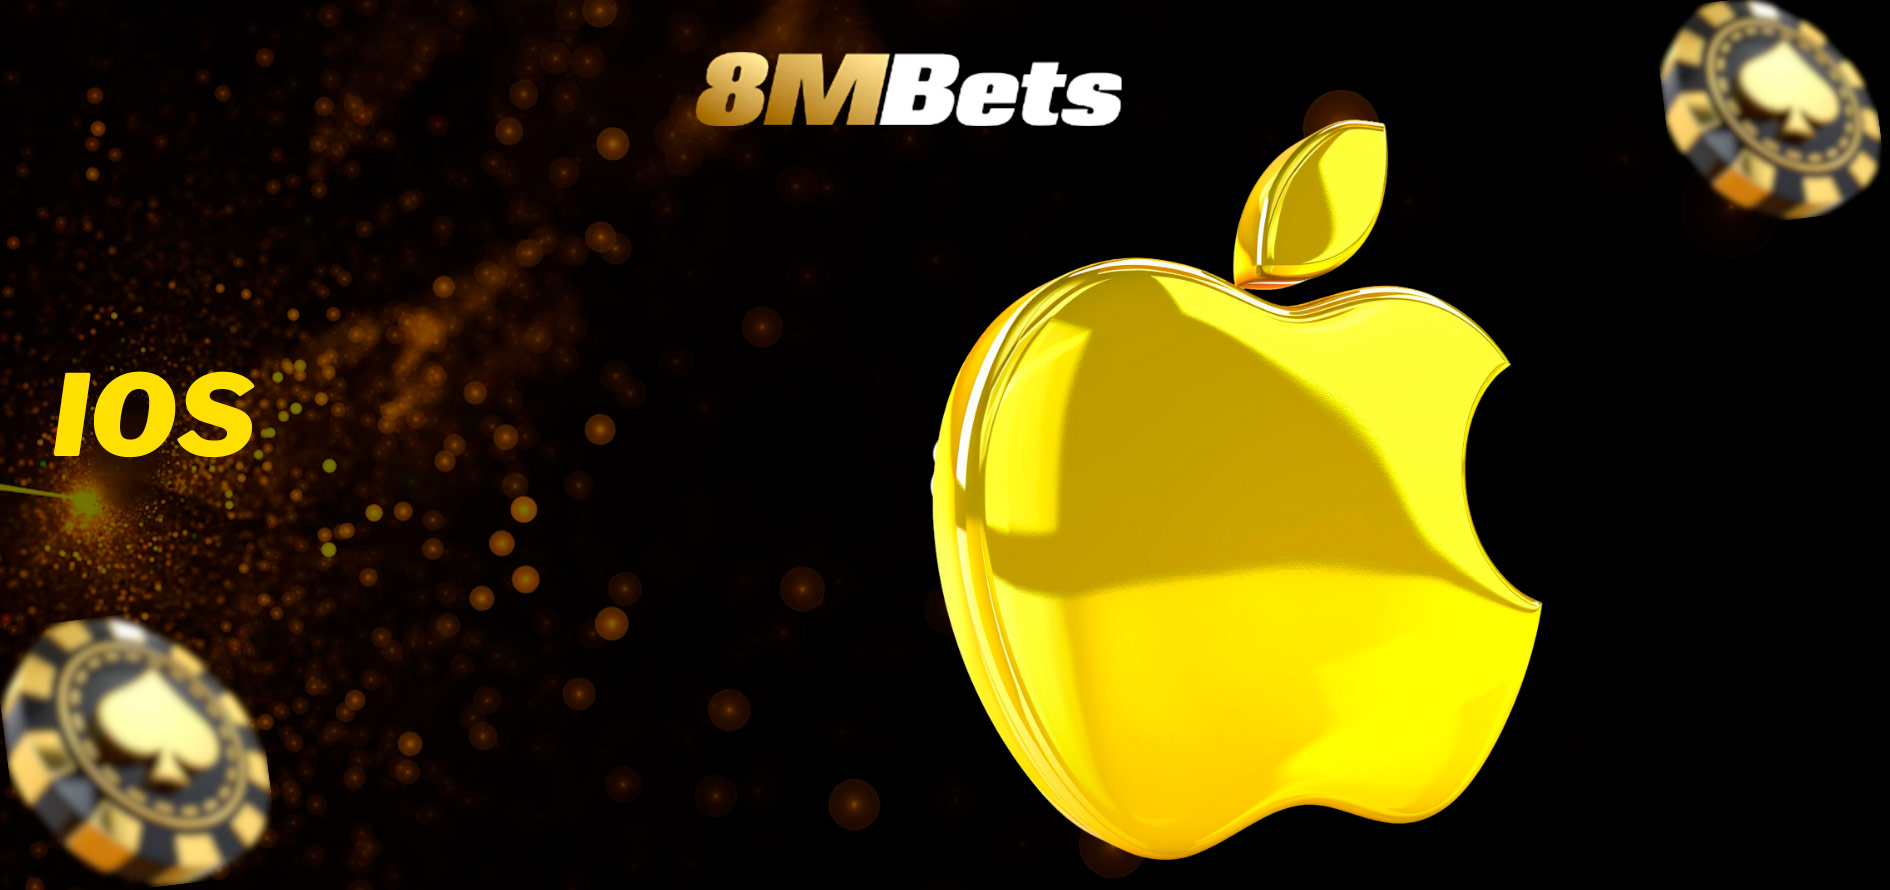 8mbets Download IOS: How to Install the Top Gaming App for Your Mobile Device